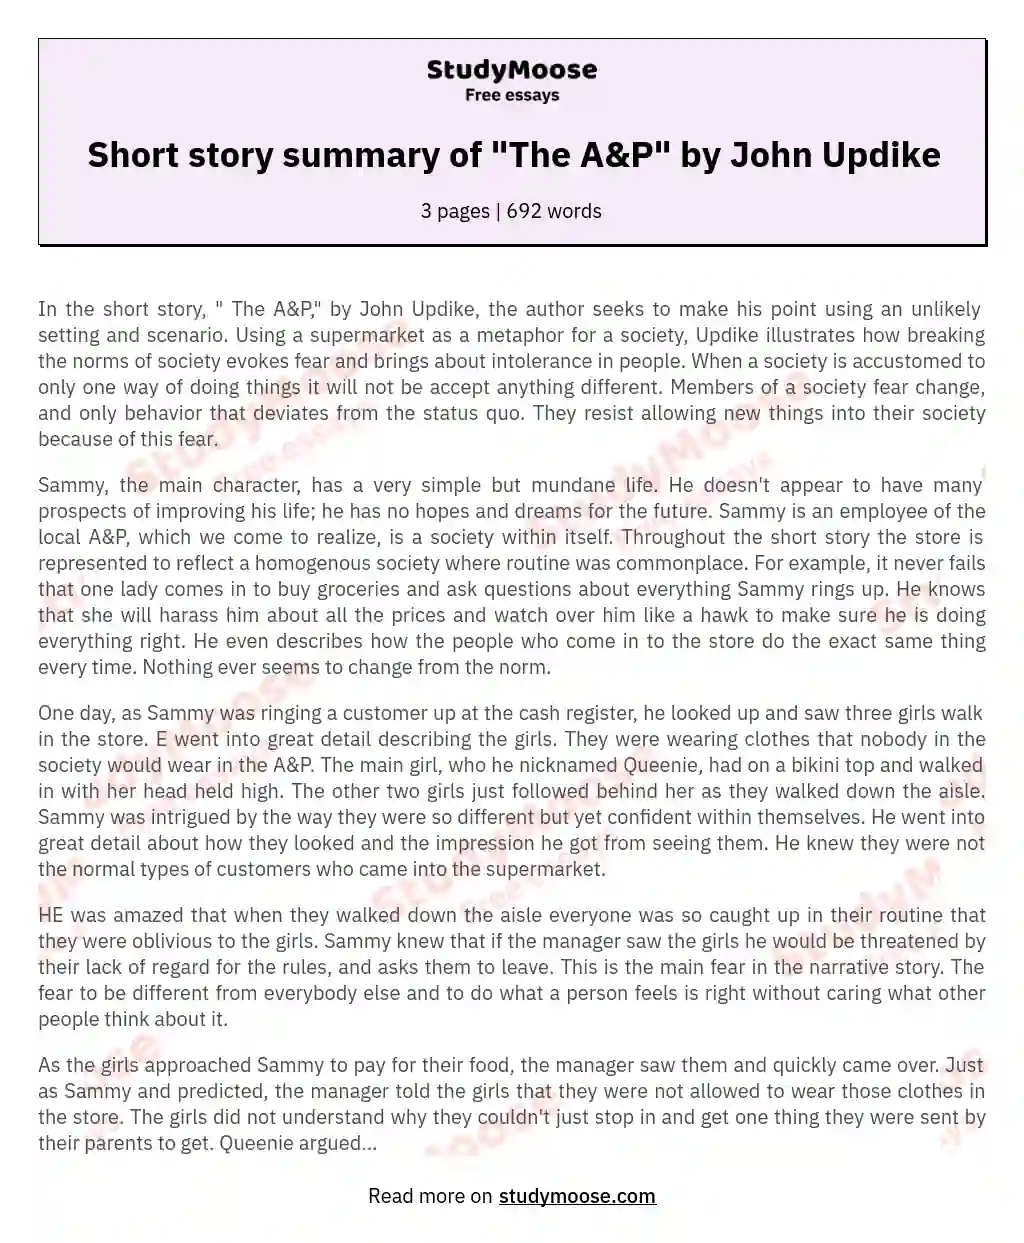 Short story summary of "The A&P" by John Updike essay